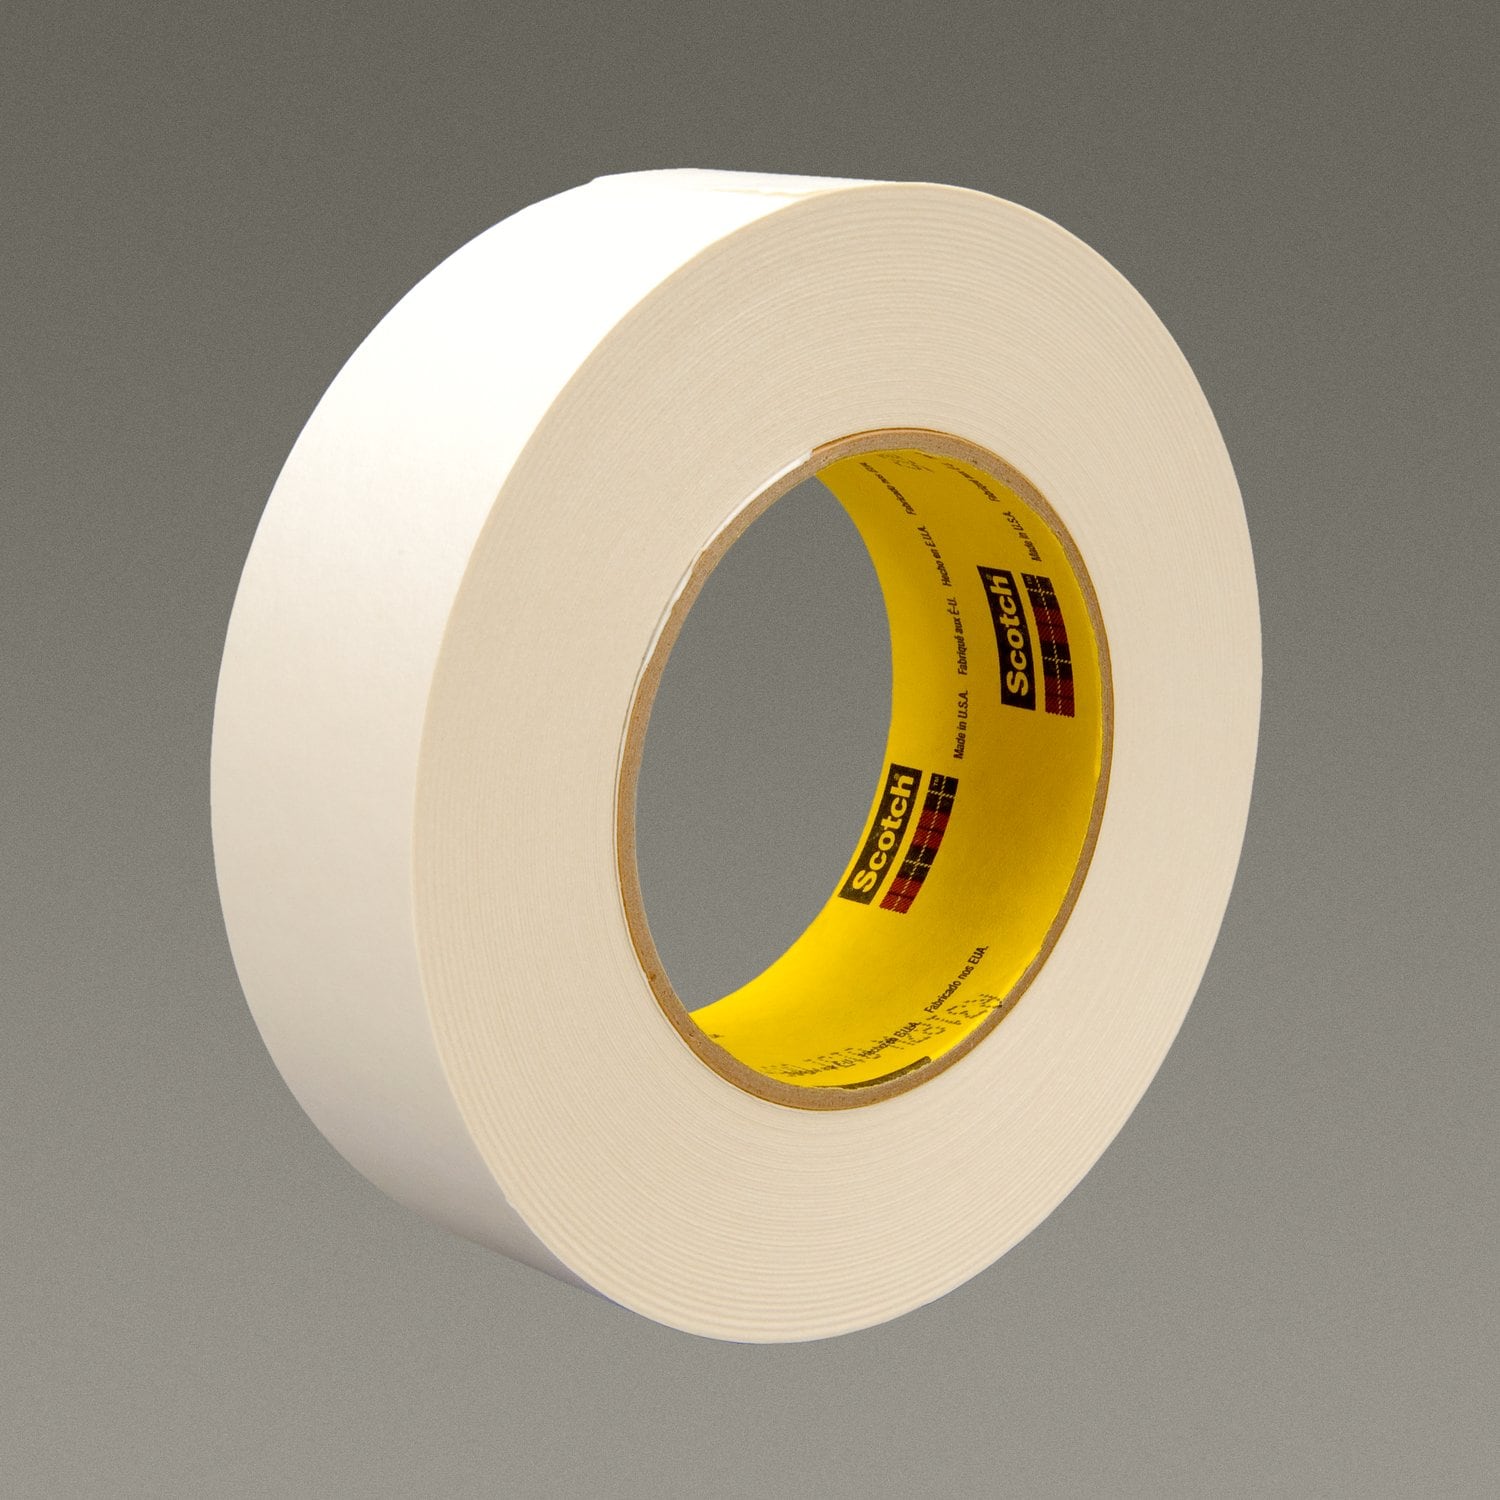 7100028050 - 3M Repulpable Strong Single Coated Tape R3187, White, 48 mm x 55 m, 7.5
mil, 24 rolls per case